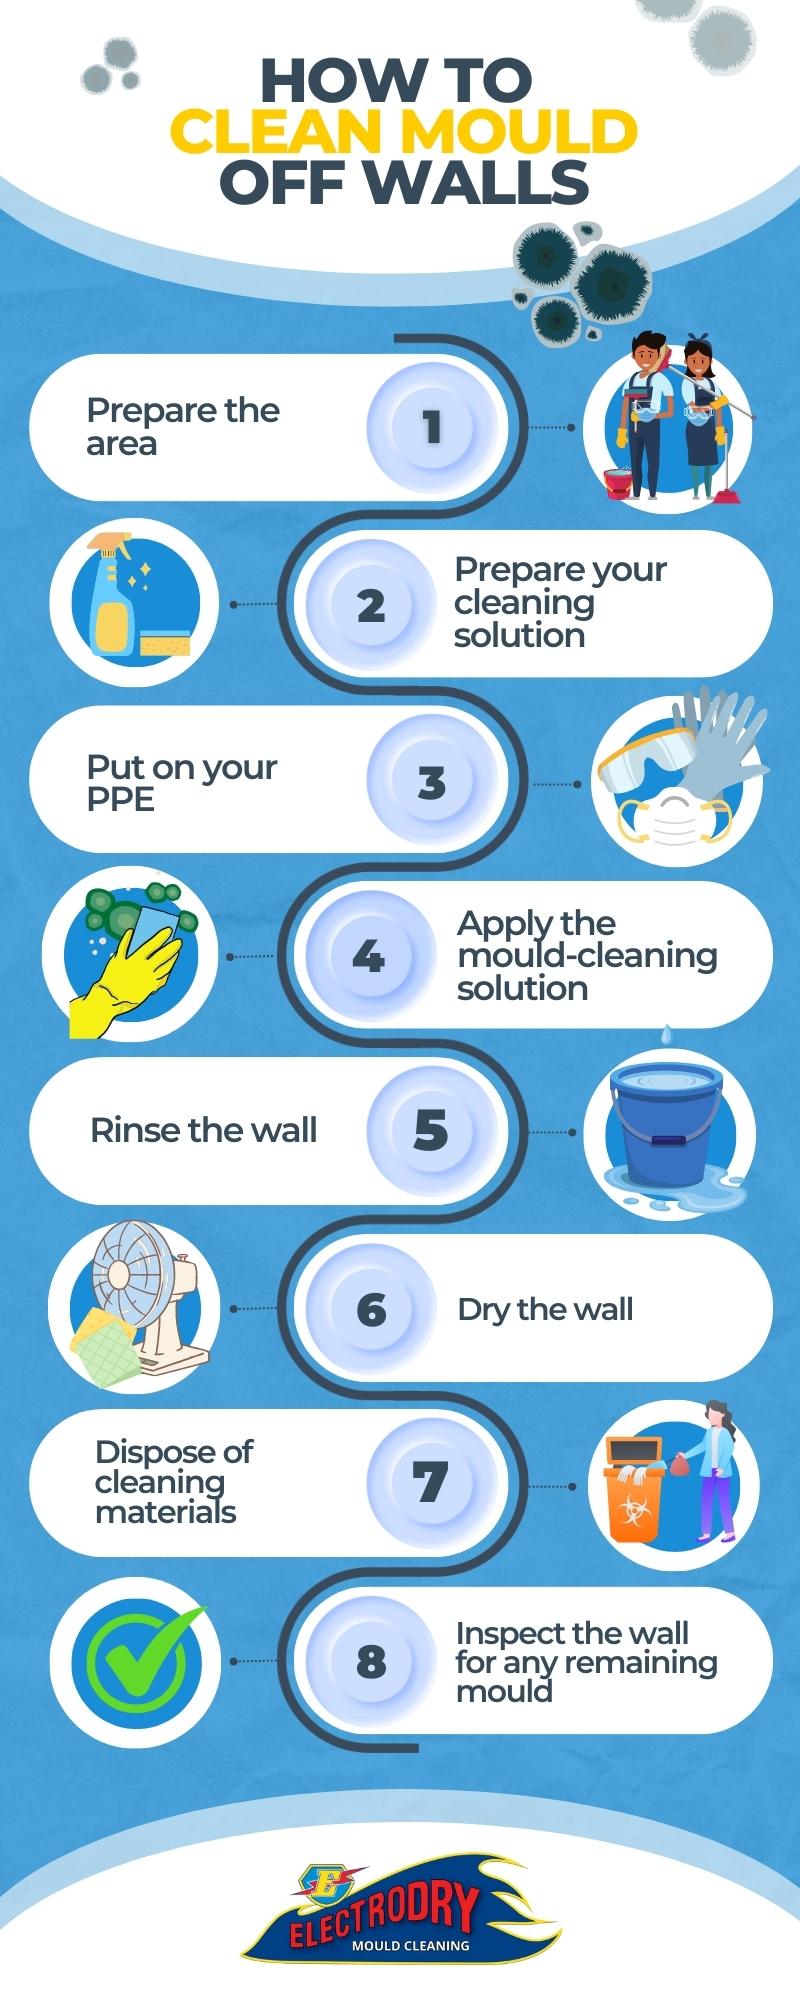 How to clean mould off walls - infographic